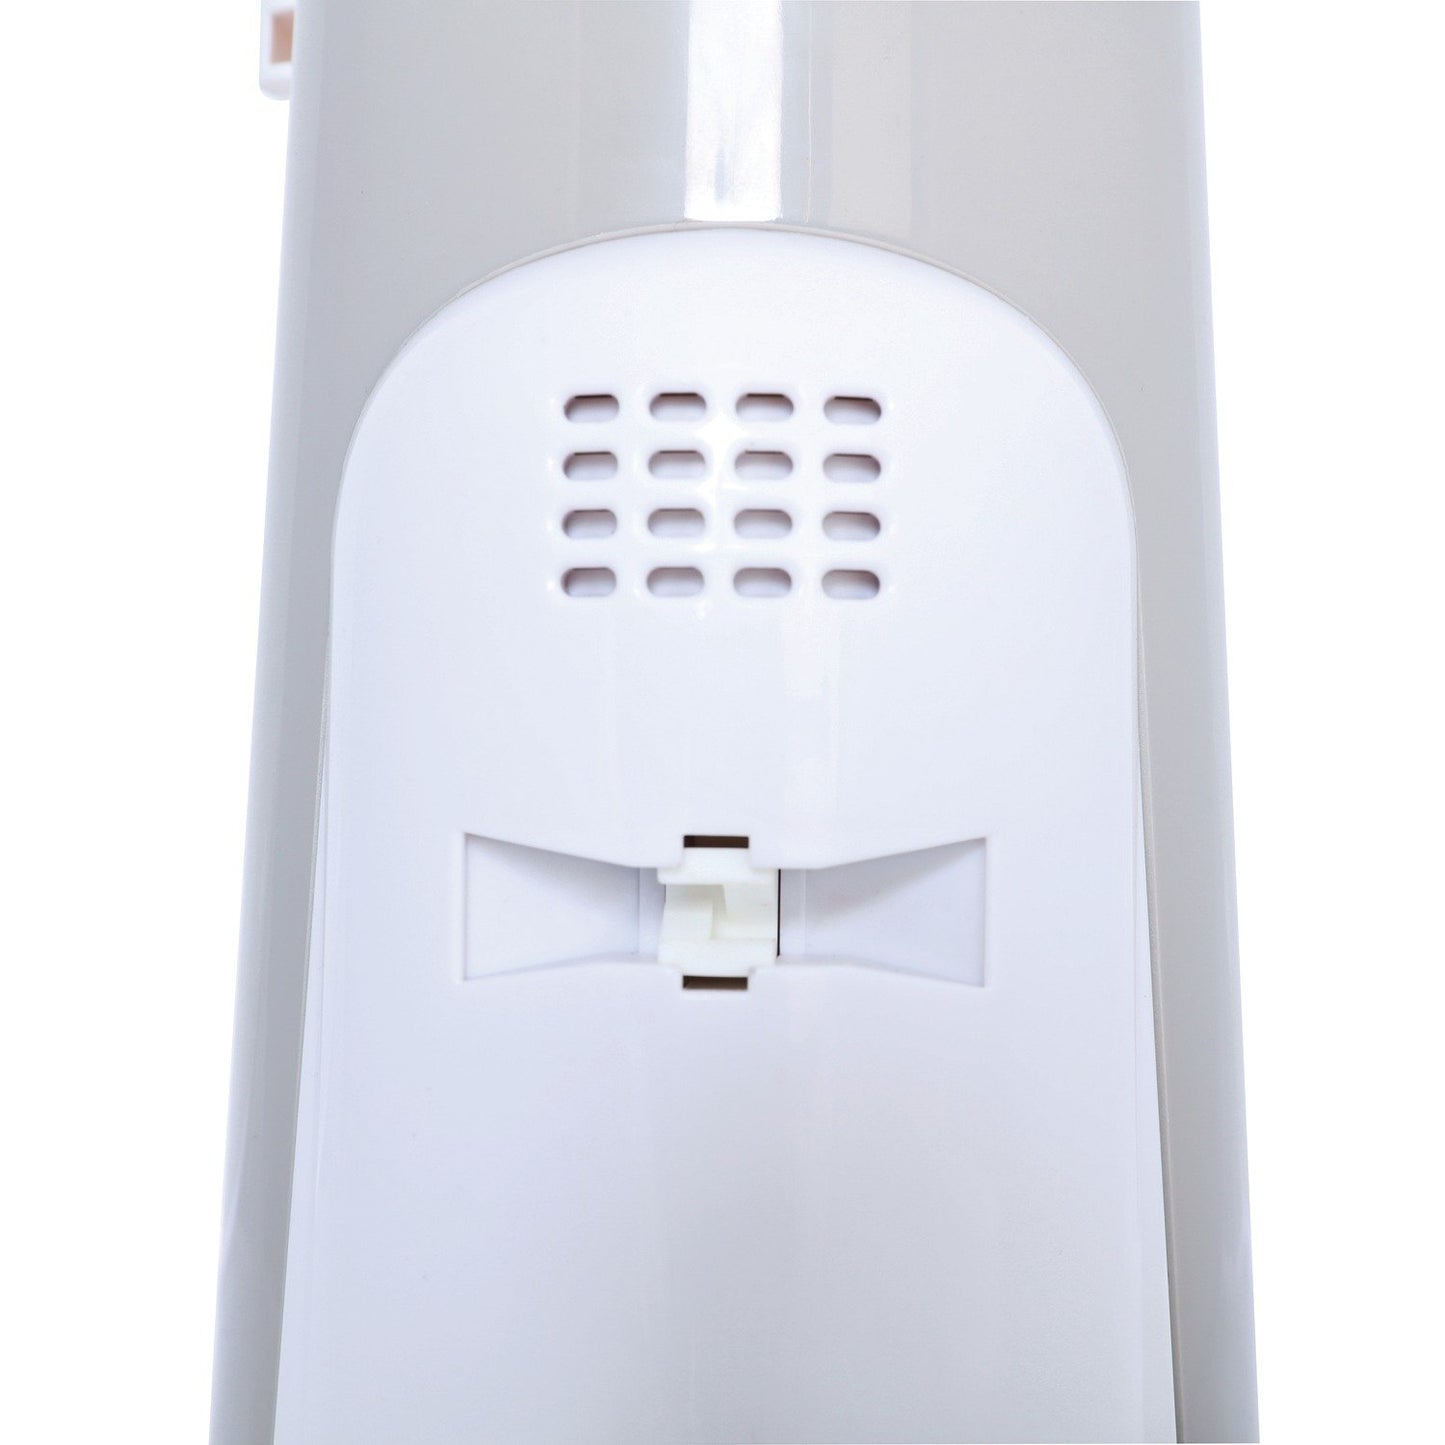 BRENTWOOD J-30W Electric Can Opener (White)